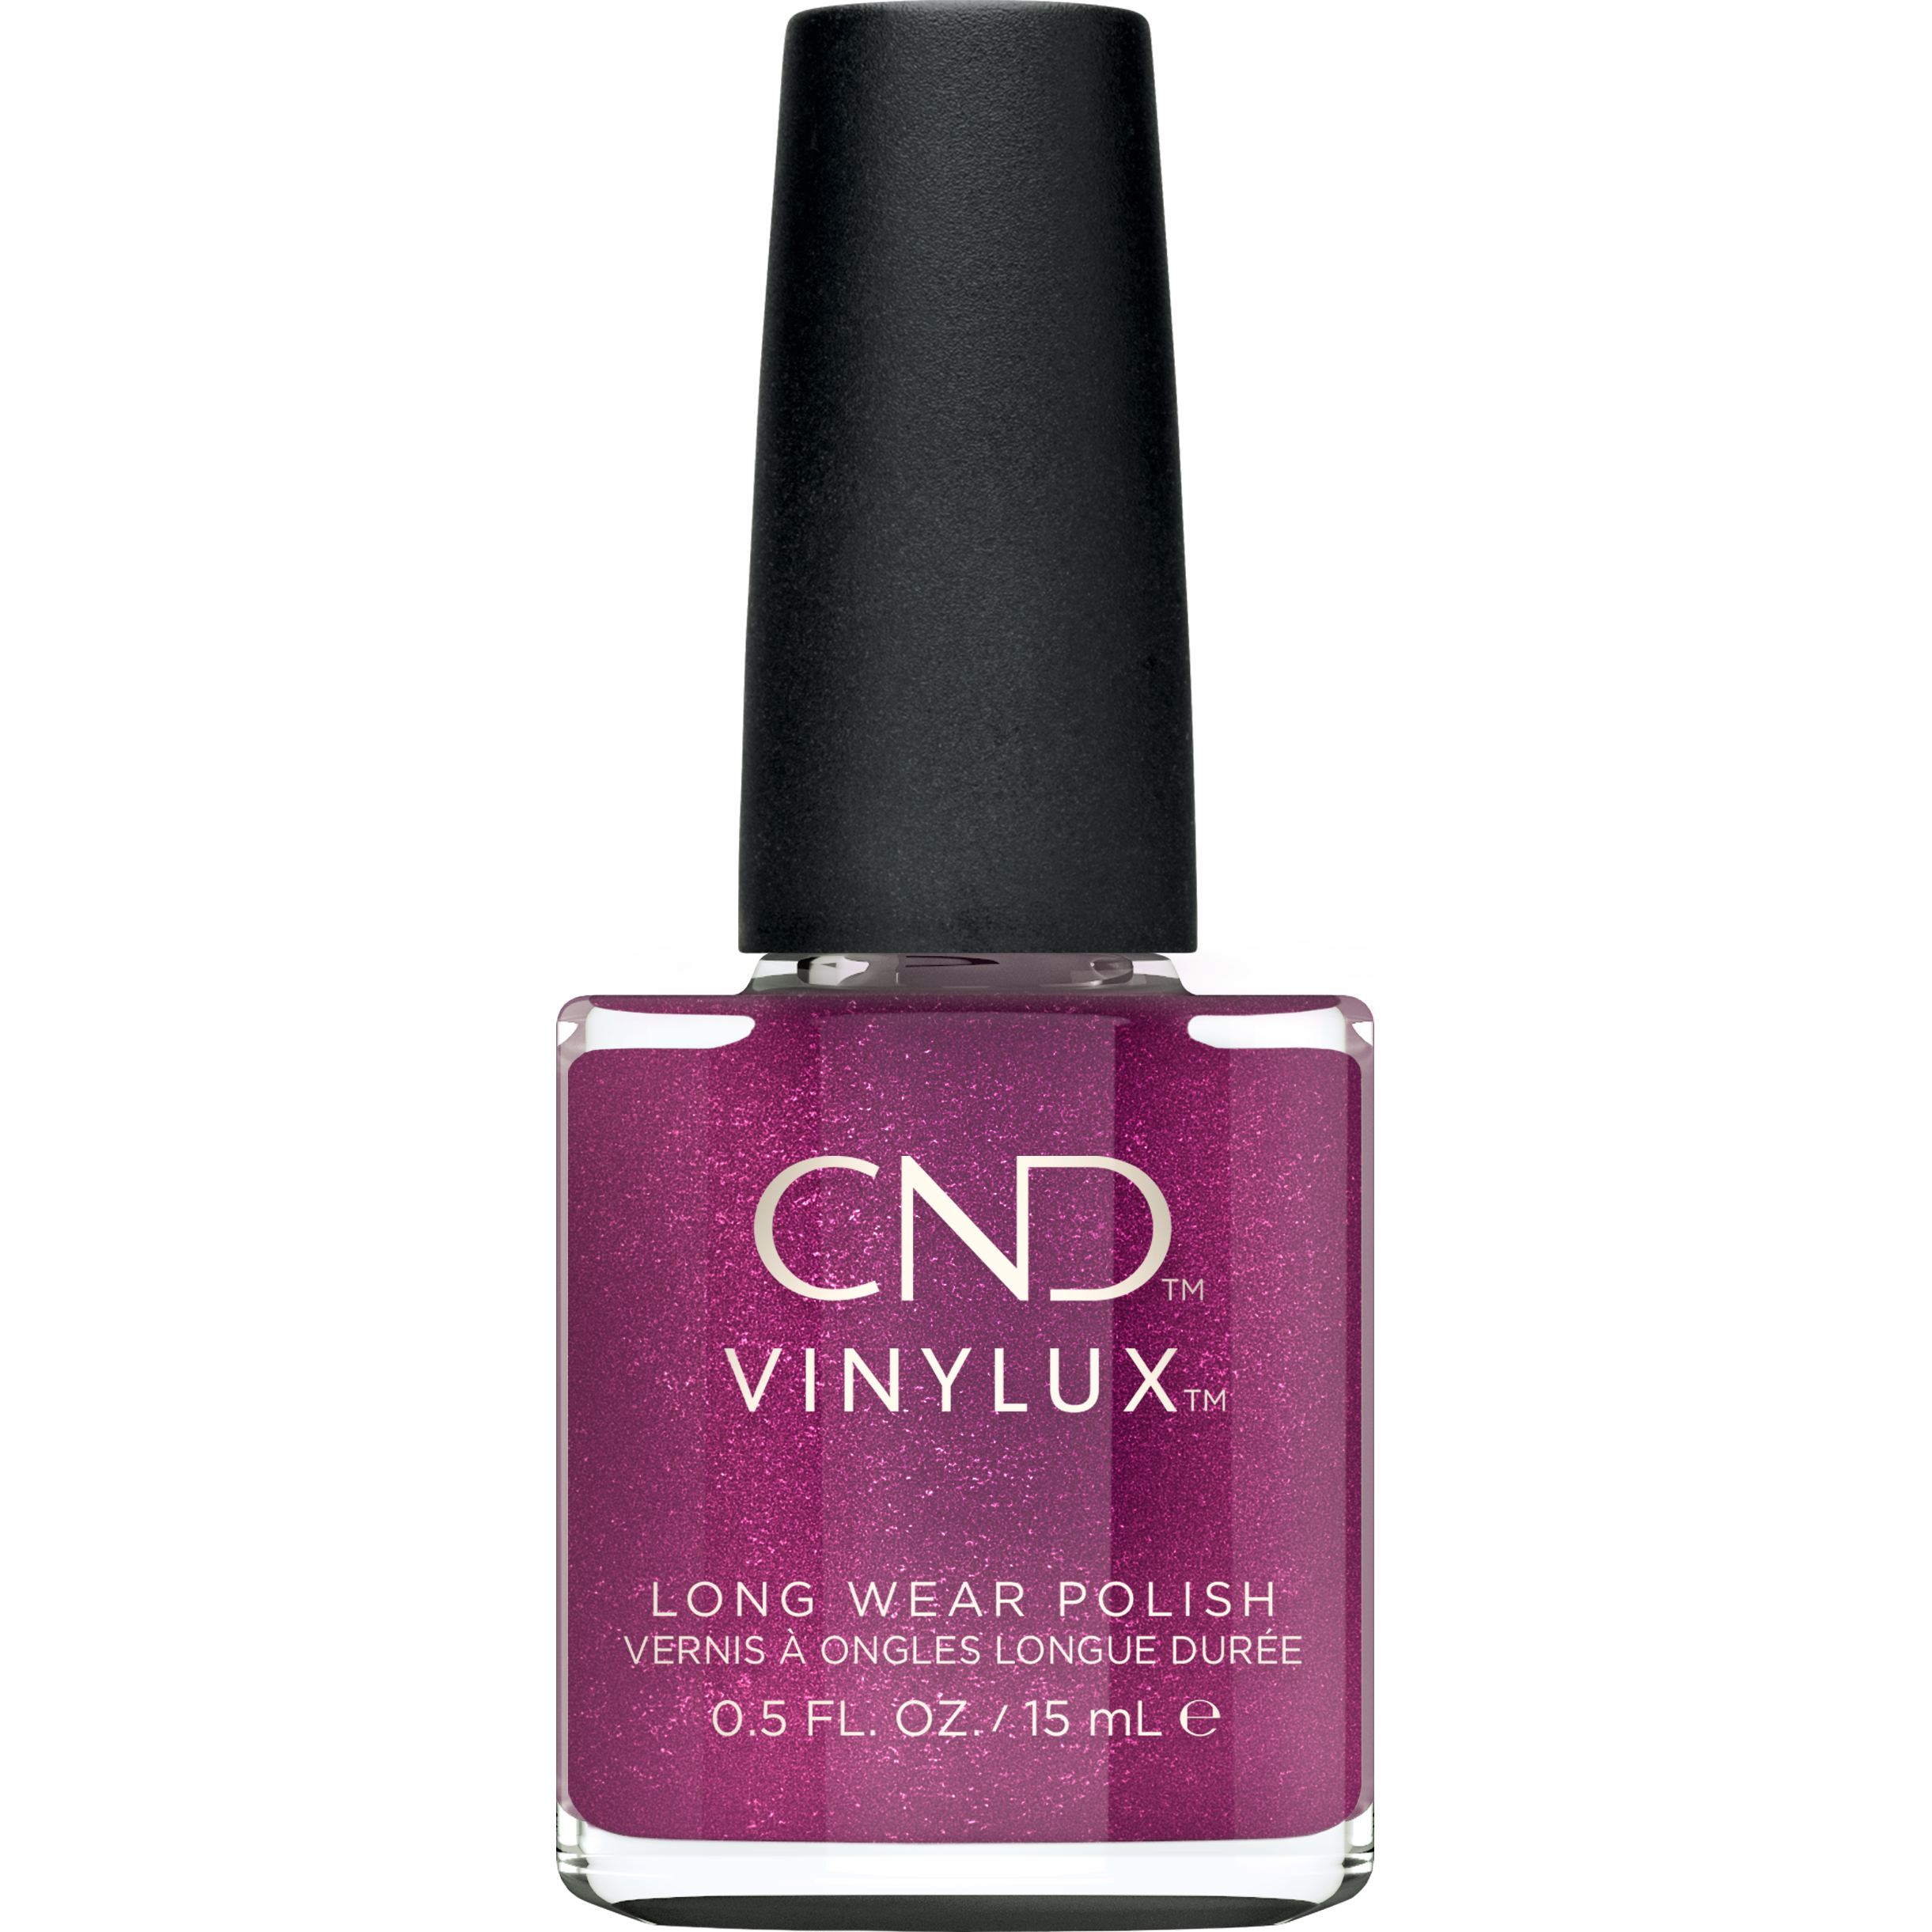 Bilde av Cnd Vinylux Cocktail Couture Collection Long Wear Polish Drama Queen #